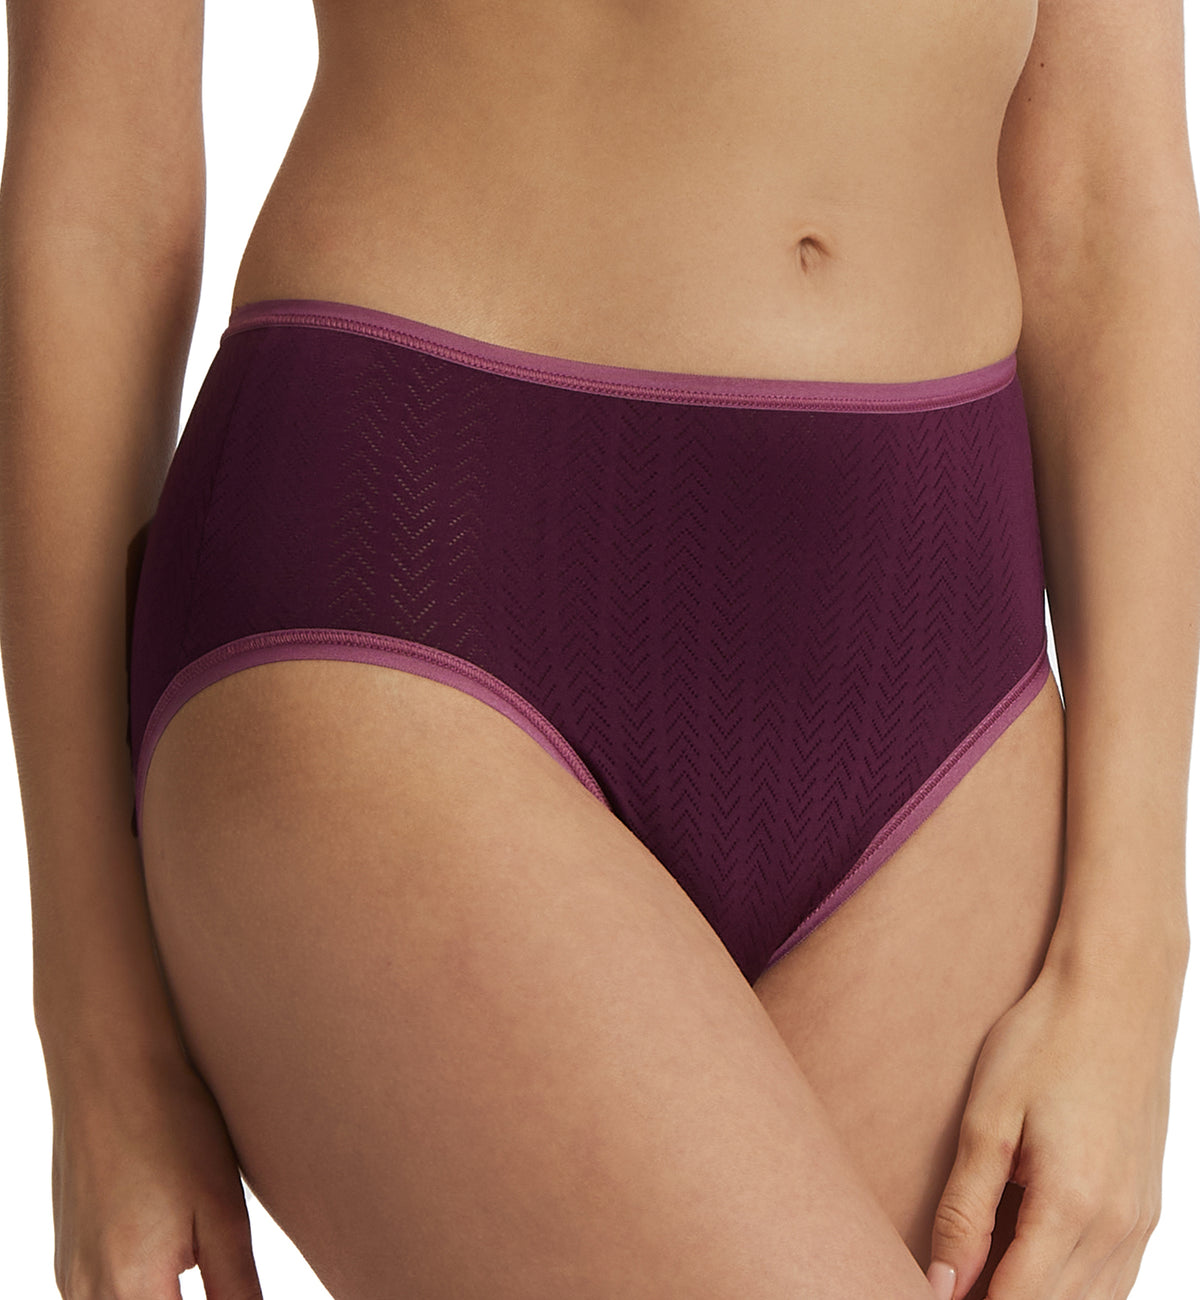 Hanky Panky MoveCalm High Waisted Brief (2P2264),XS,Dried Cherry/Damson Plum - Dried Cherry/Damson Plum,XS